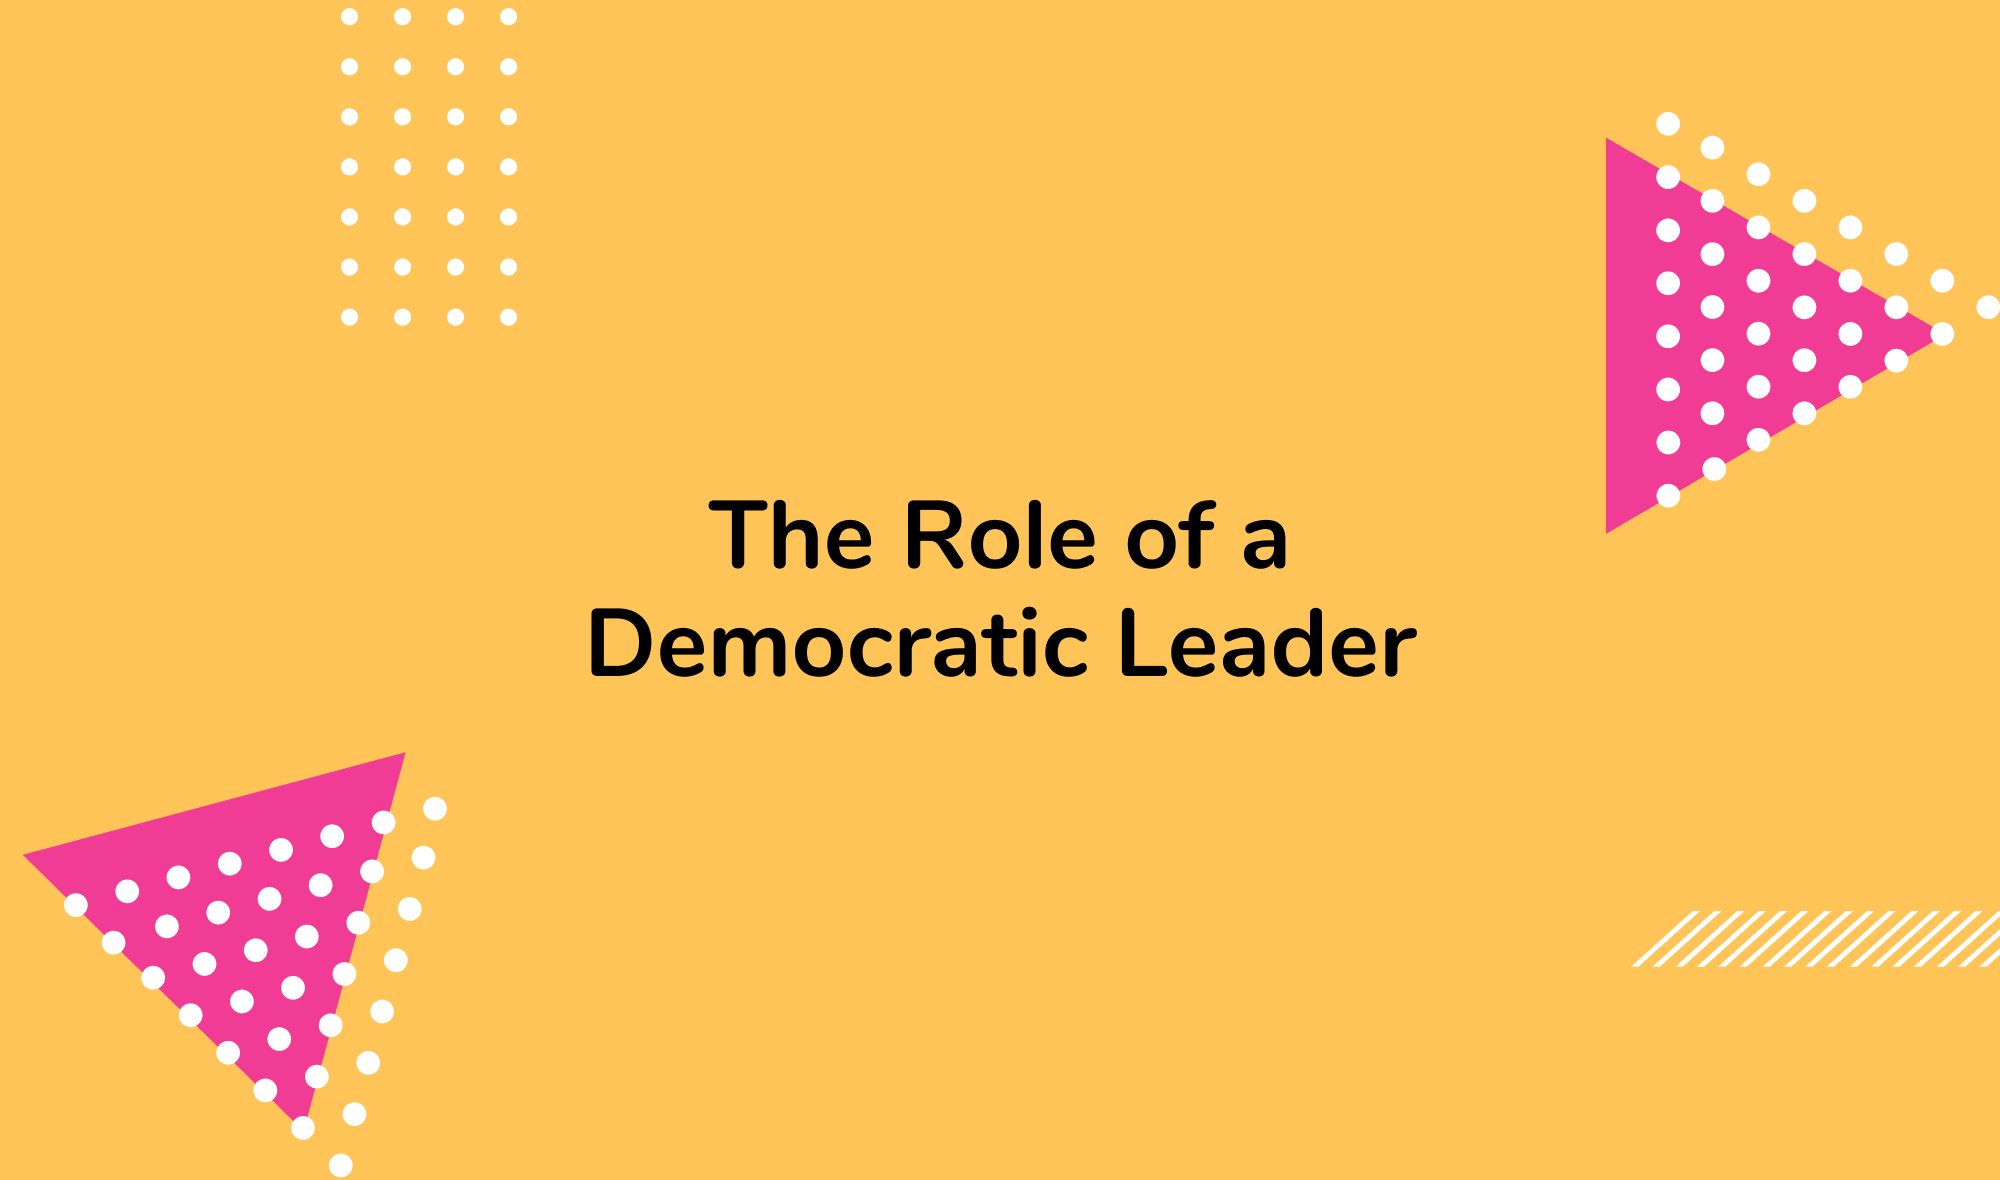 The Role of a Democratic Leader